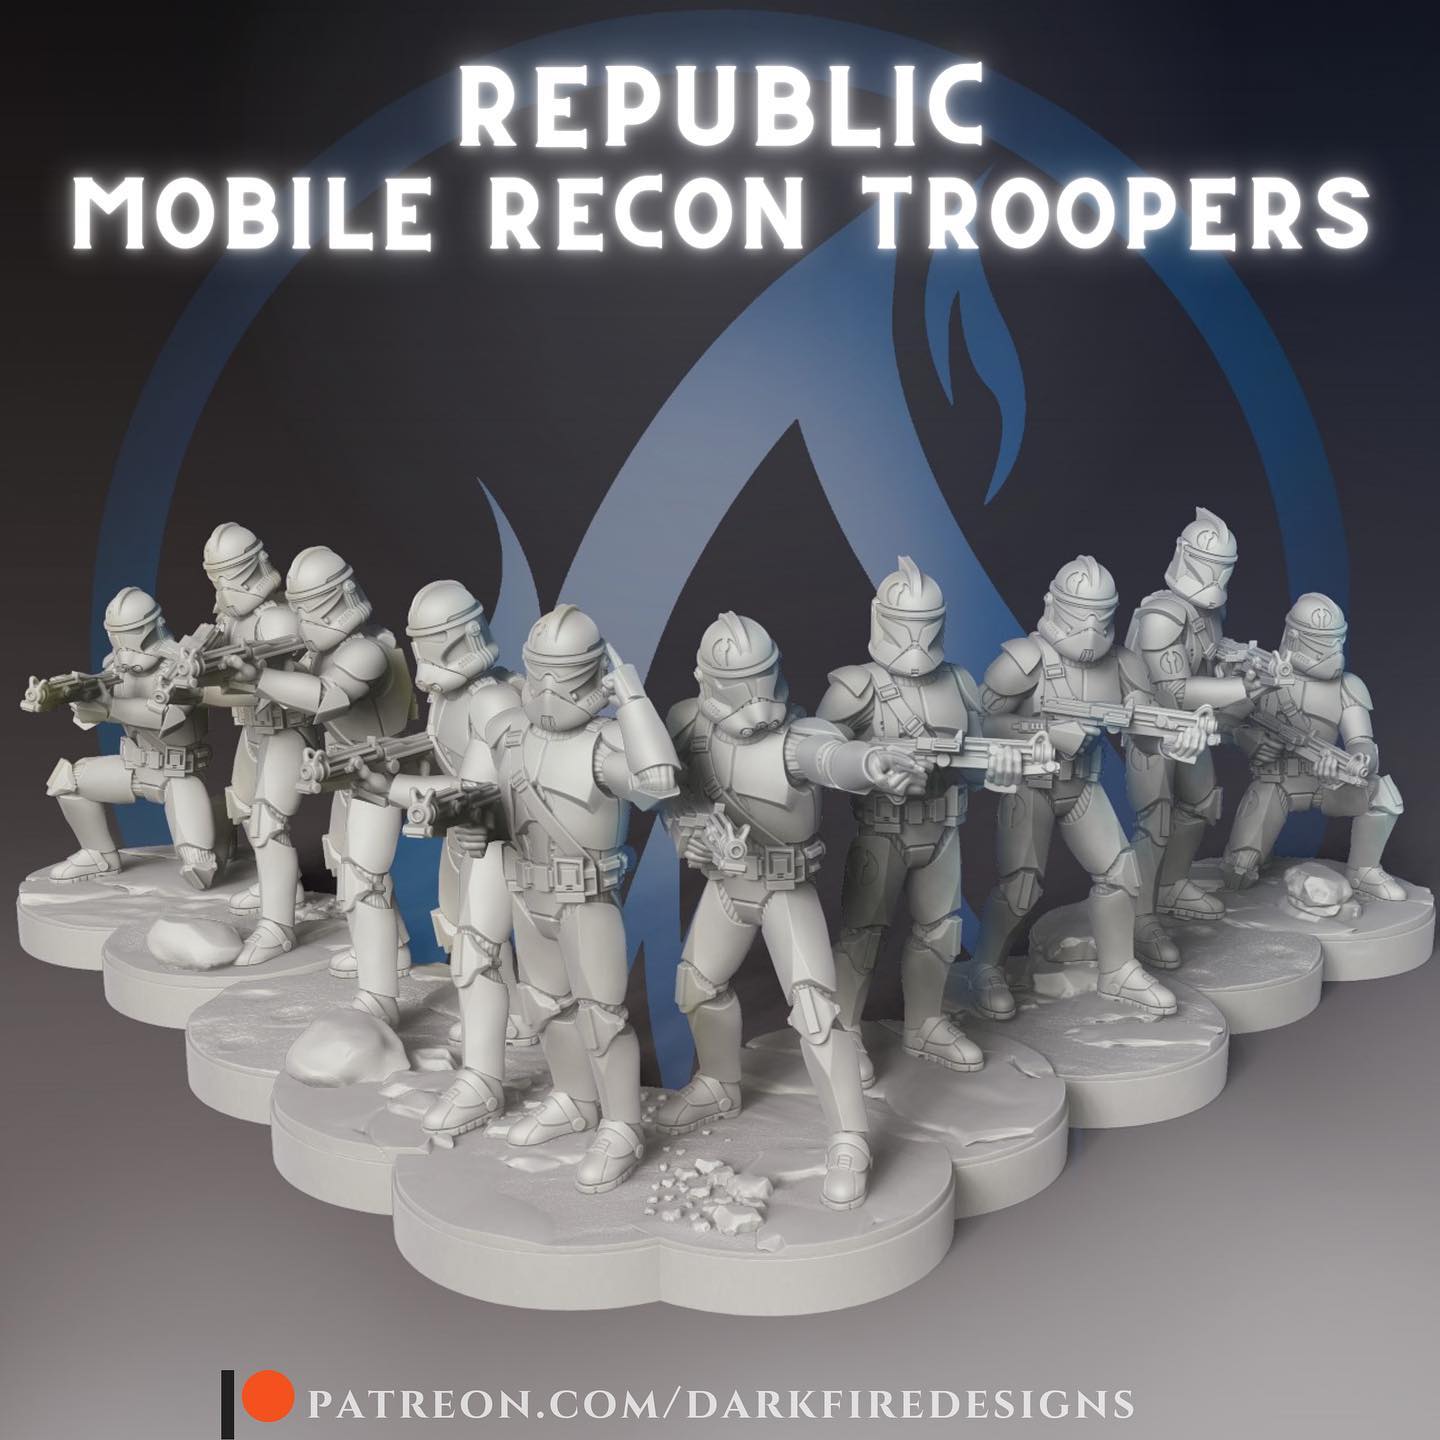 Republic Mobile Recon Troopers